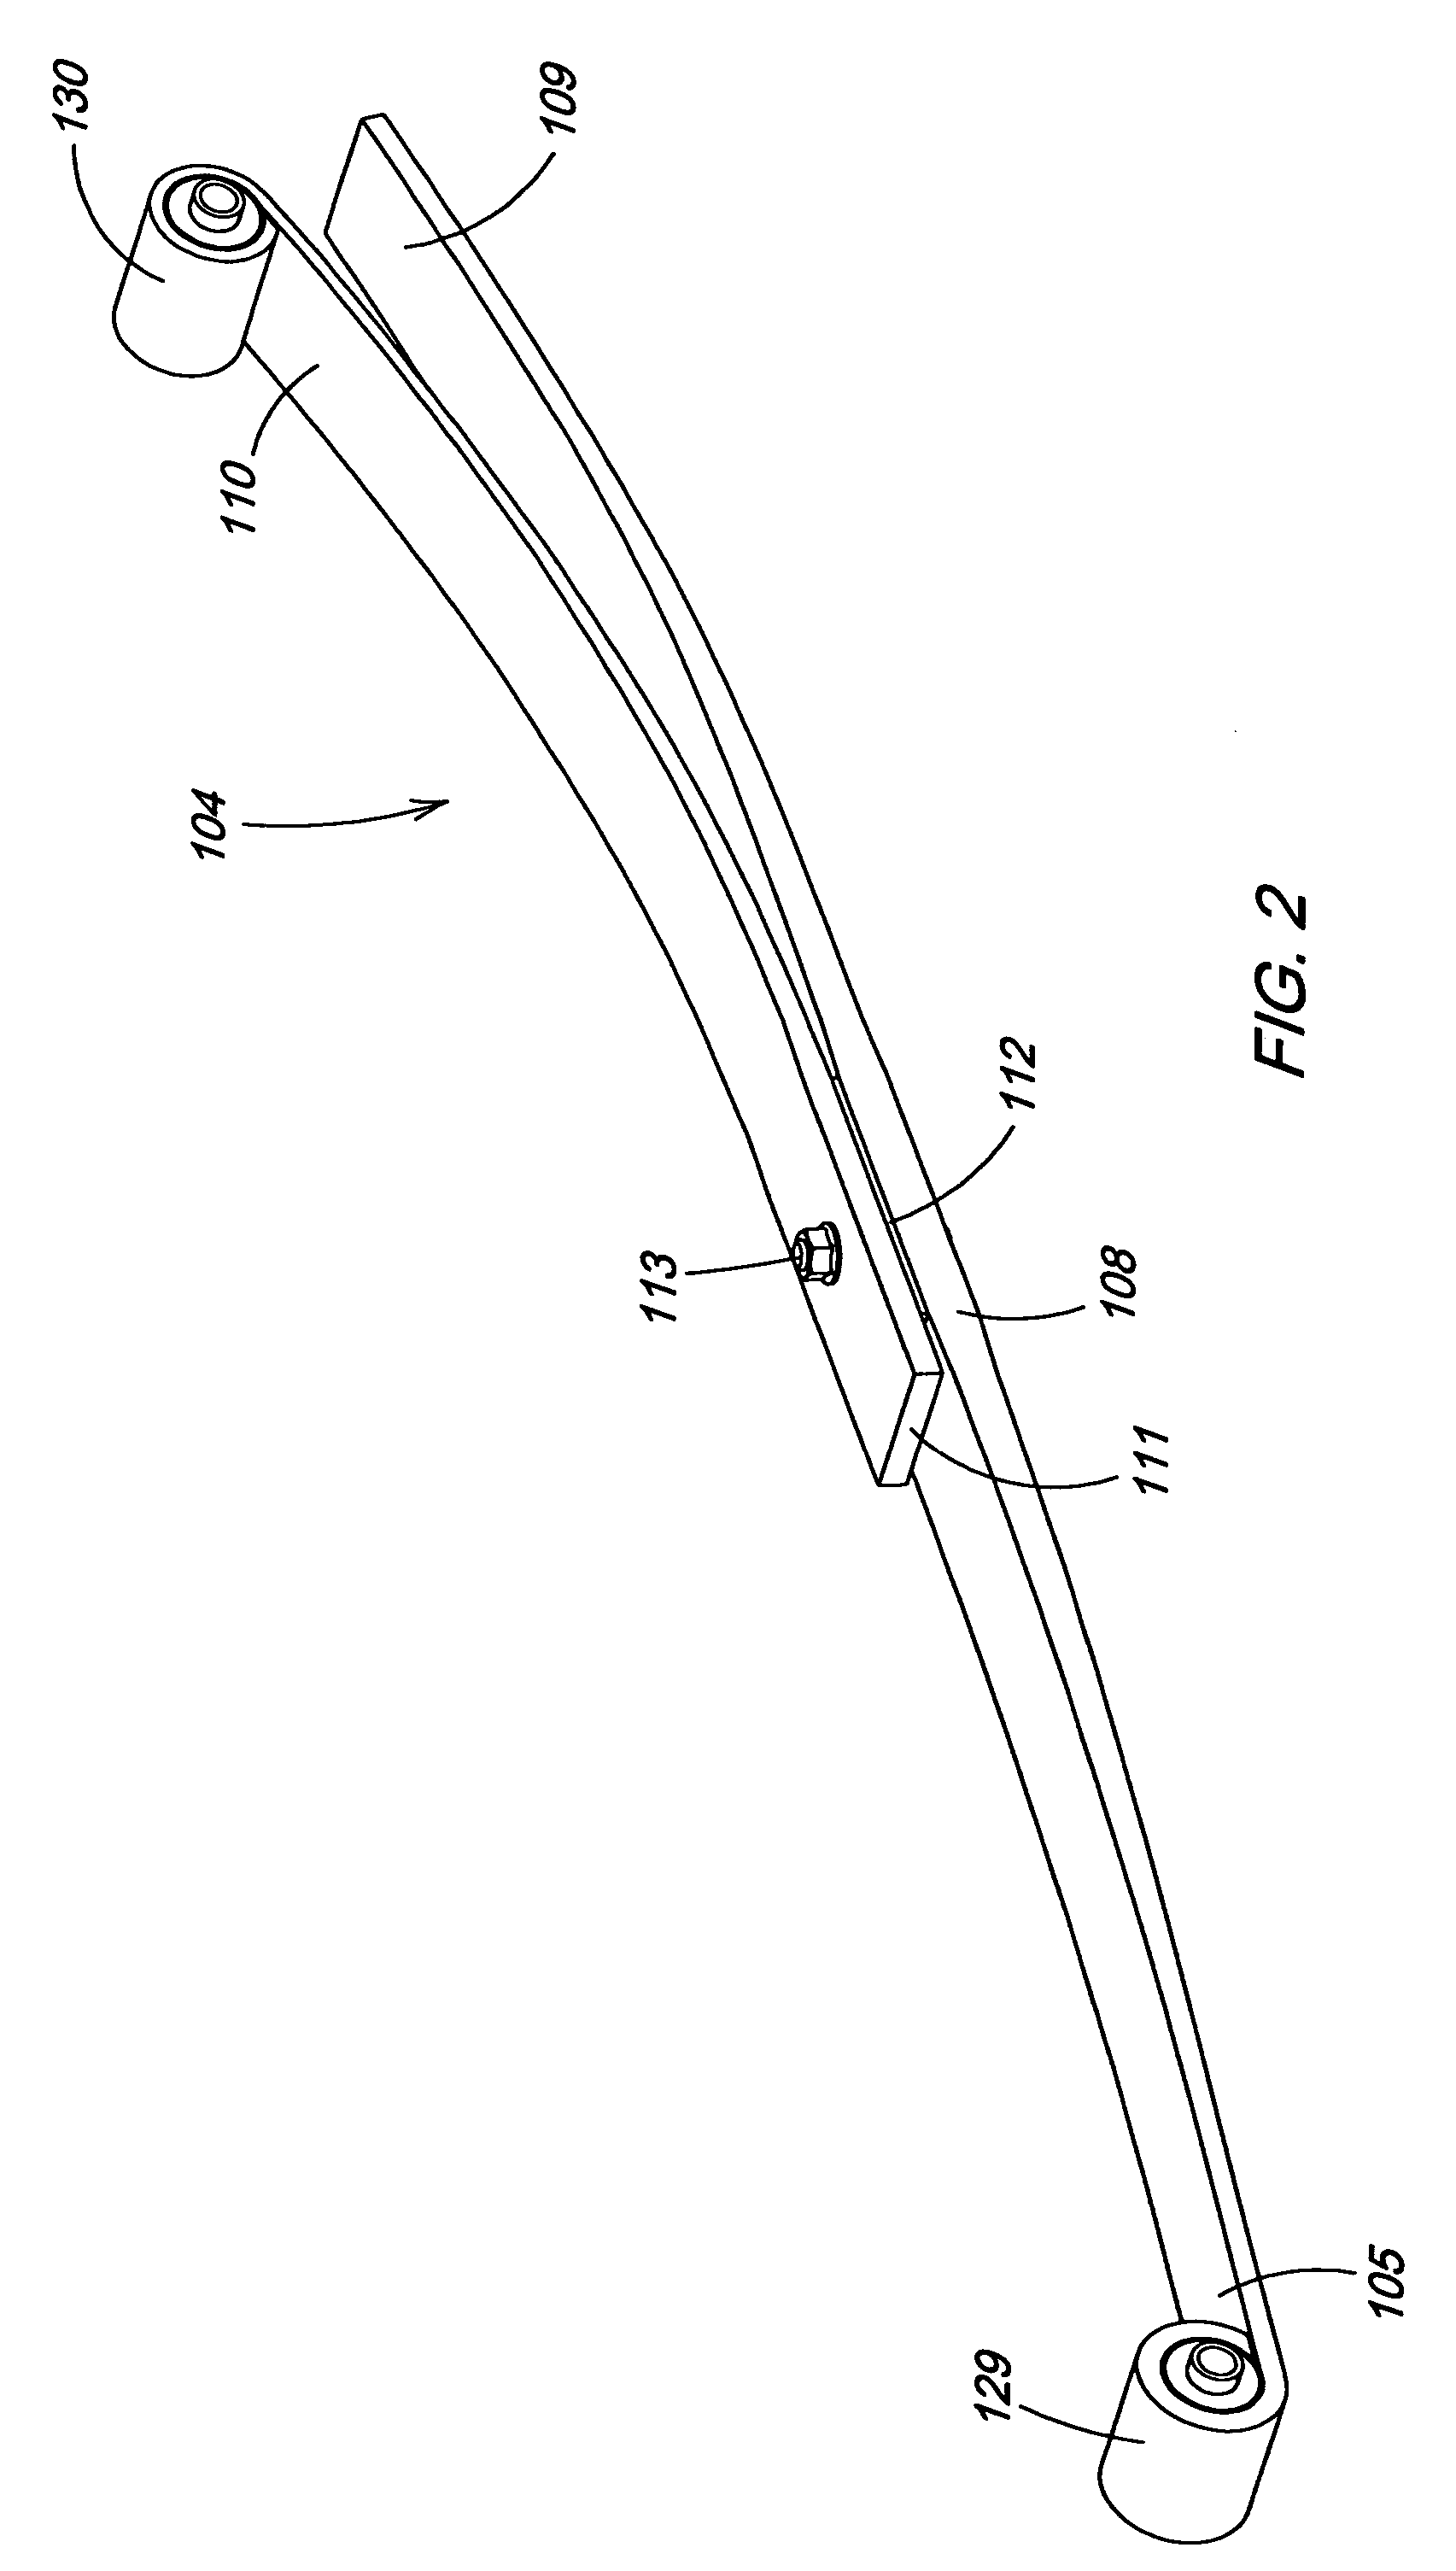 Dual rate leaf spring suspension for utility vehicle